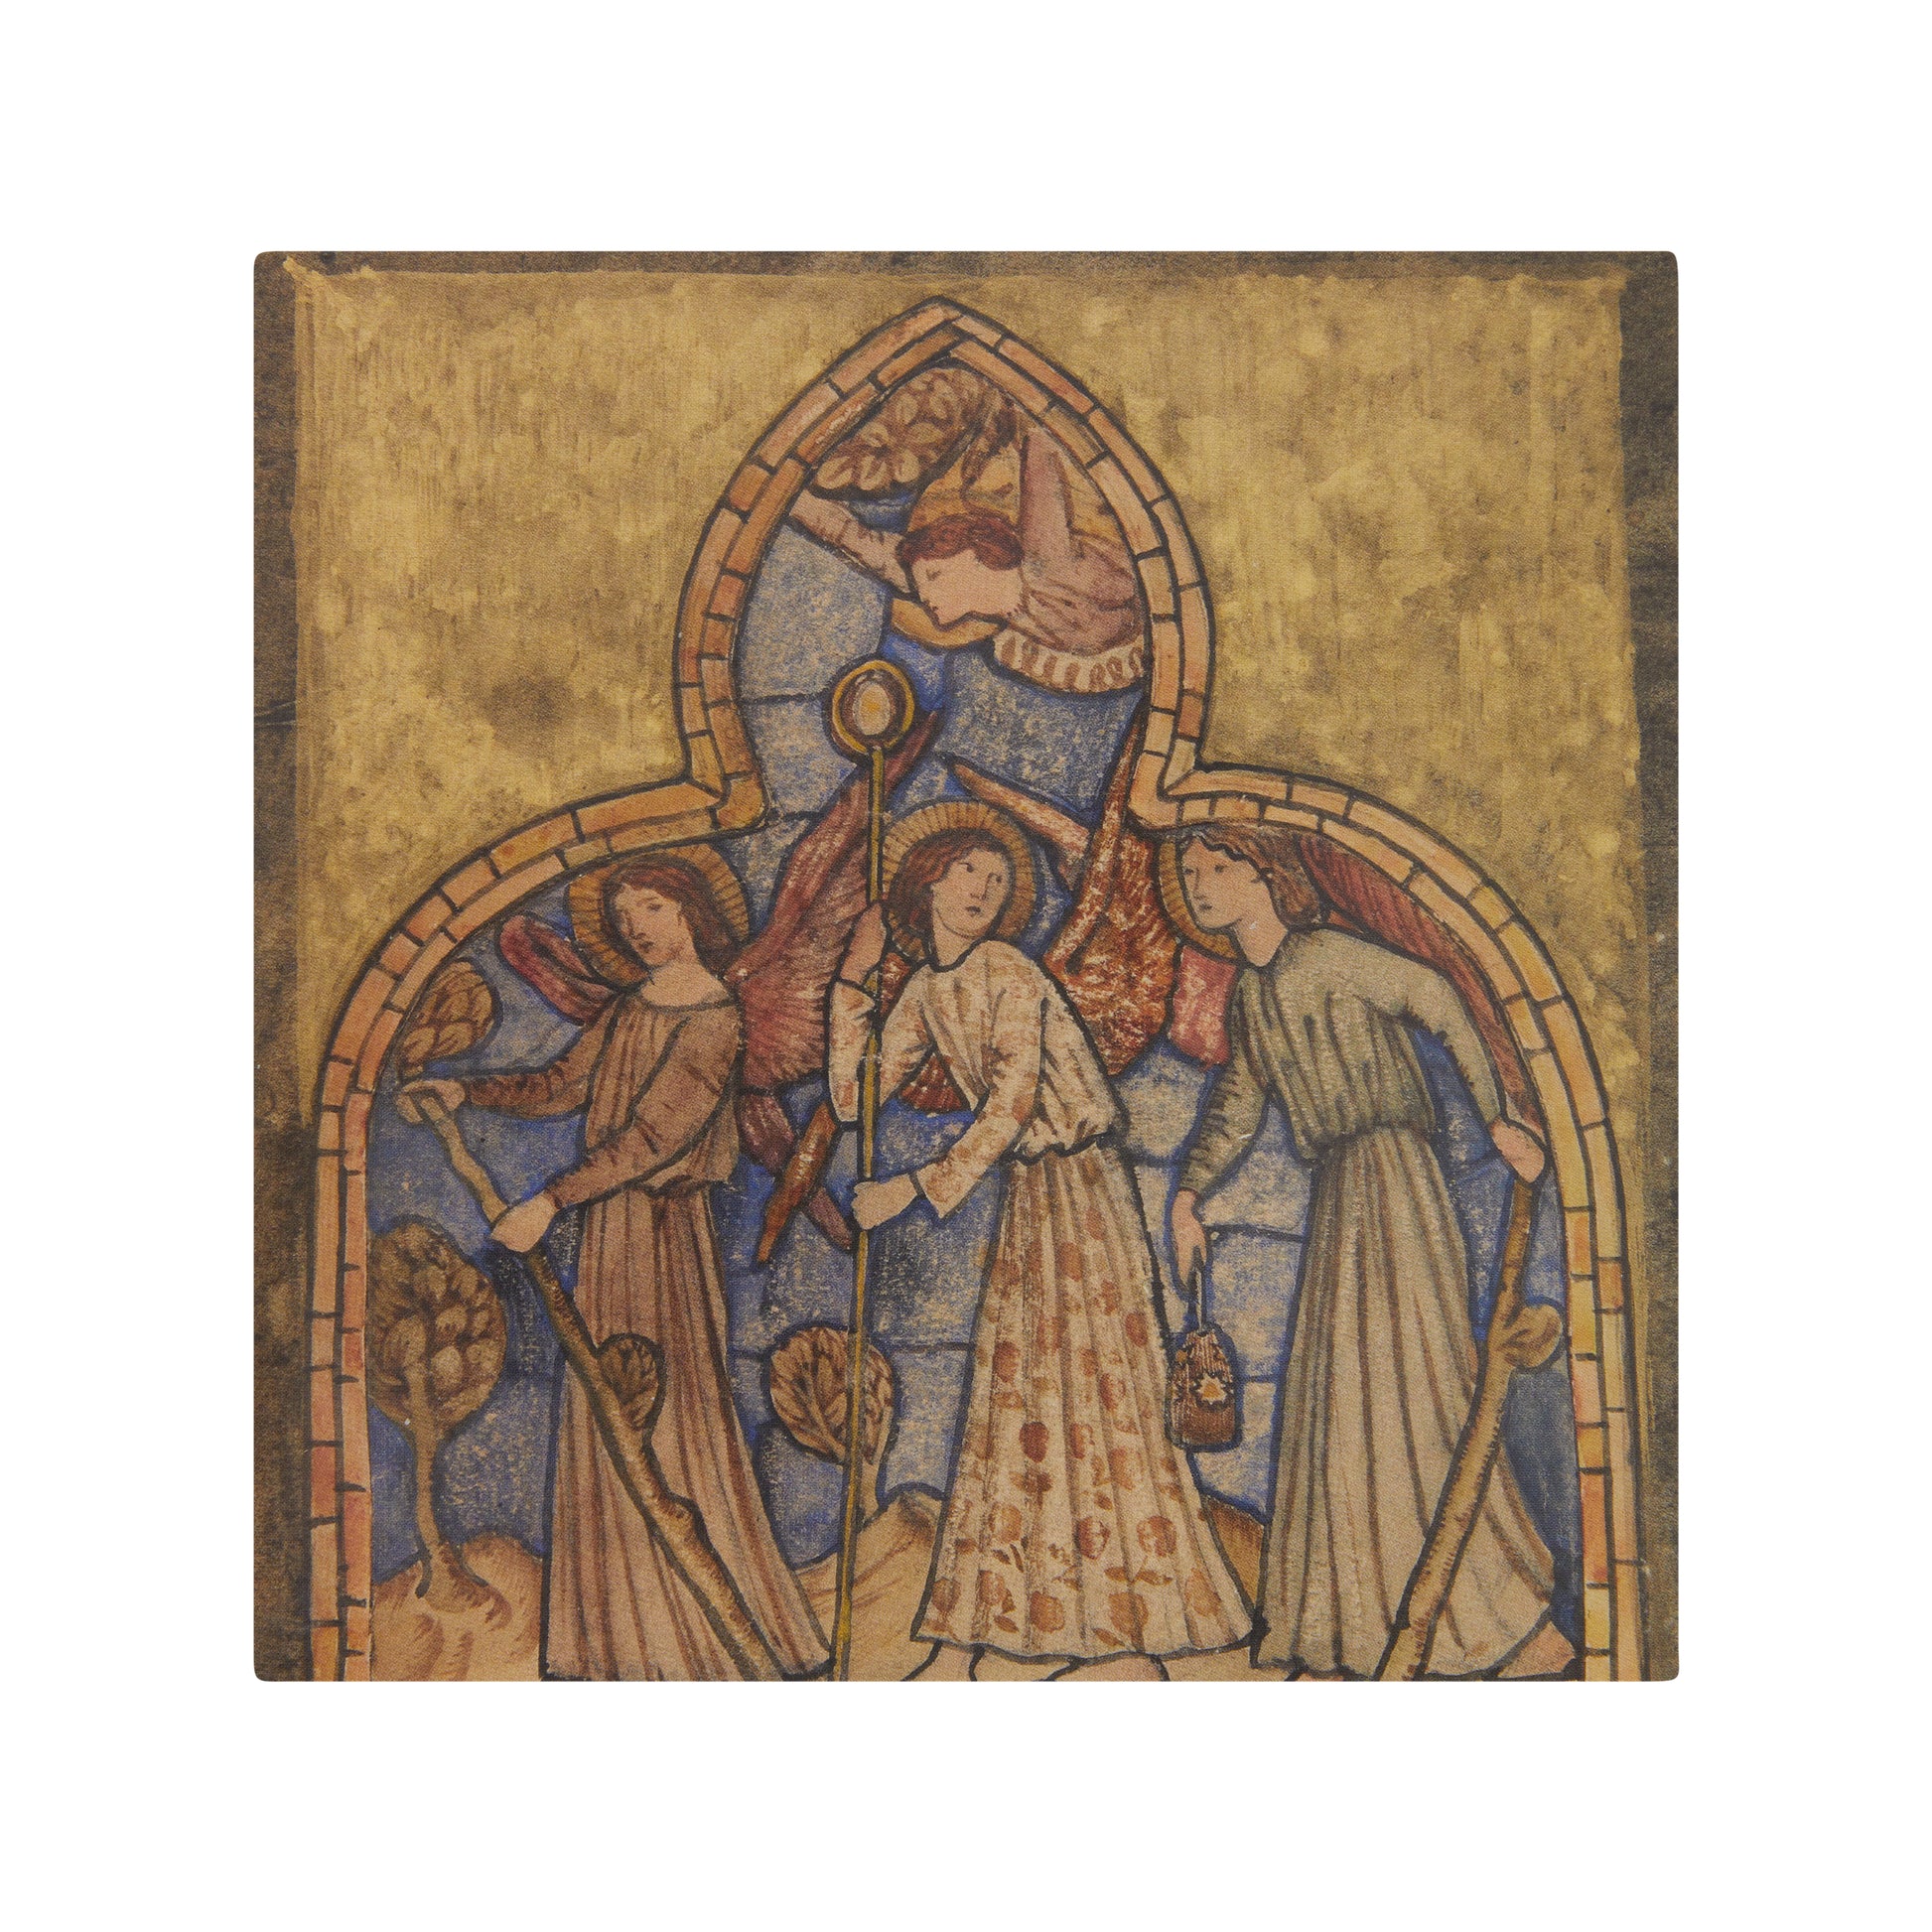 Large square Christmas card - Four angels within a stained glass window design, gold surround. By Edward Burne-Jones. From the collection of The Fitzwilliam Museum.